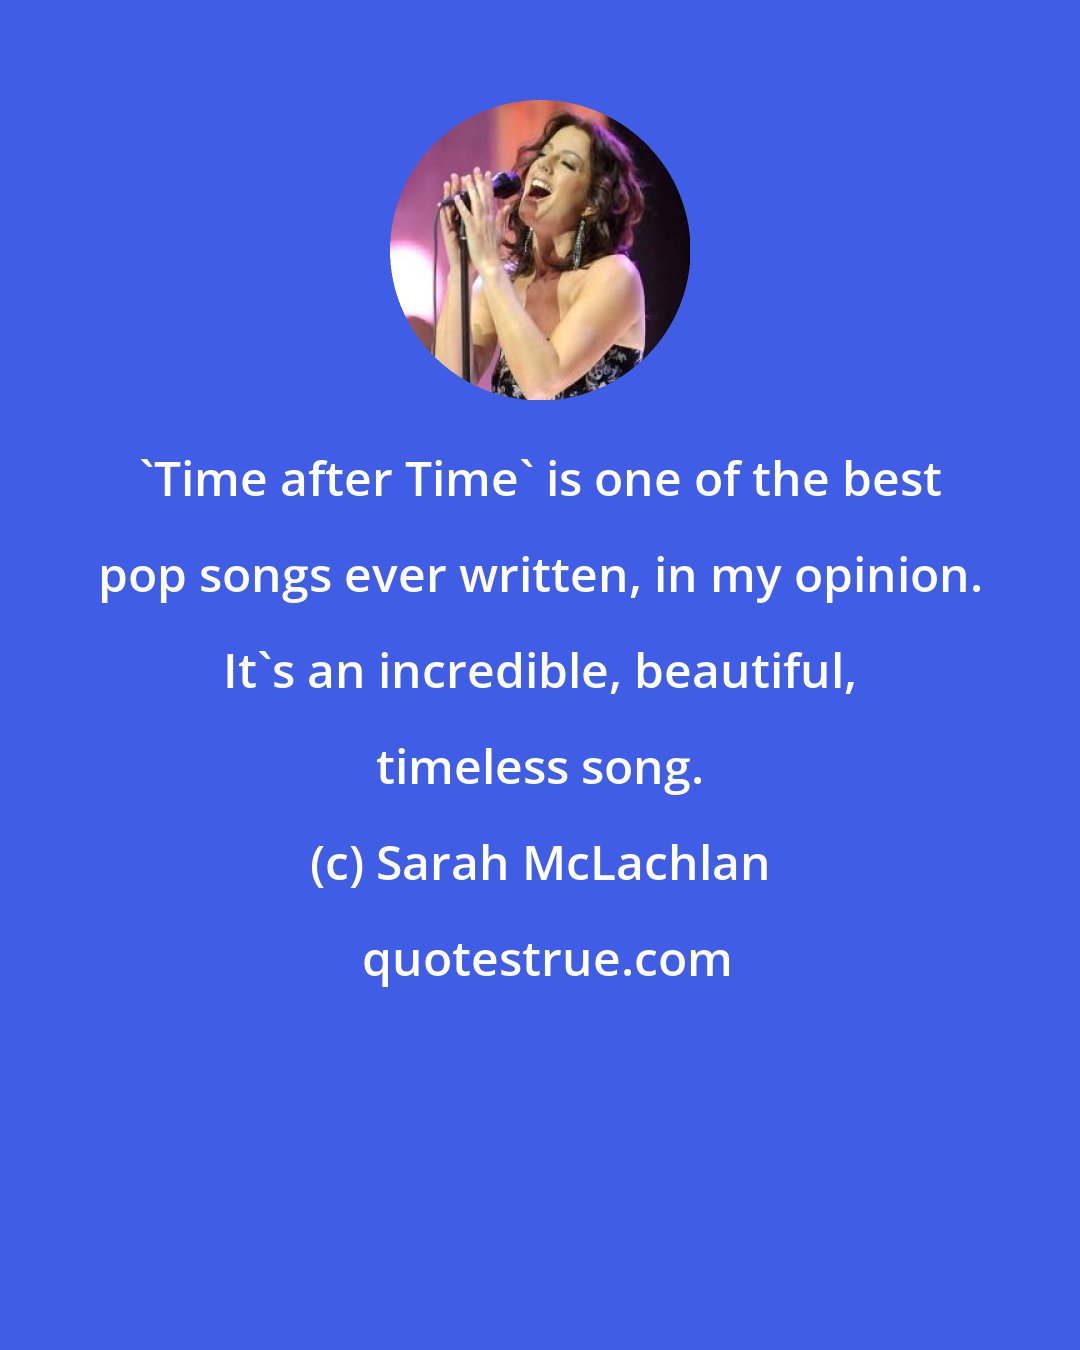 Sarah McLachlan: 'Time after Time' is one of the best pop songs ever written, in my opinion. It's an incredible, beautiful, timeless song.